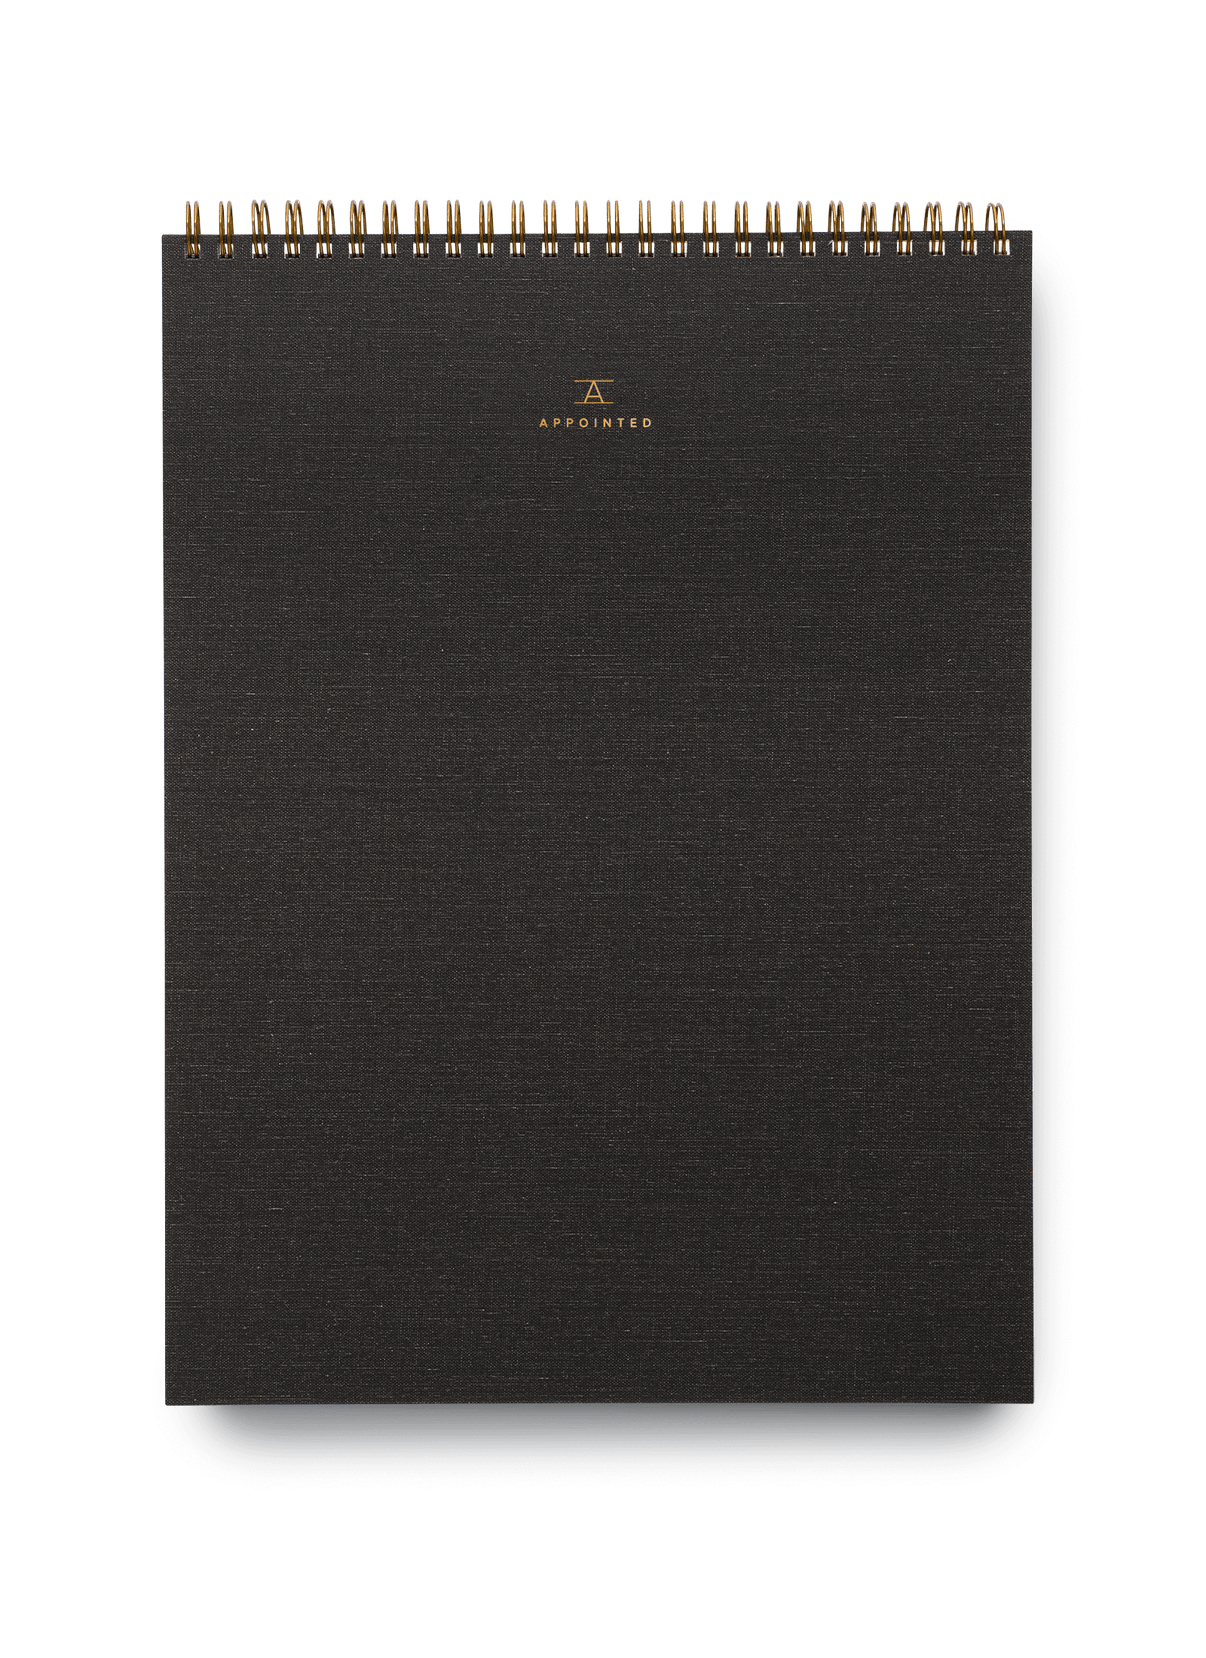 Appointed Artist Pad in Charcoal Gray with brass wire-o binding || Charcoal Gray